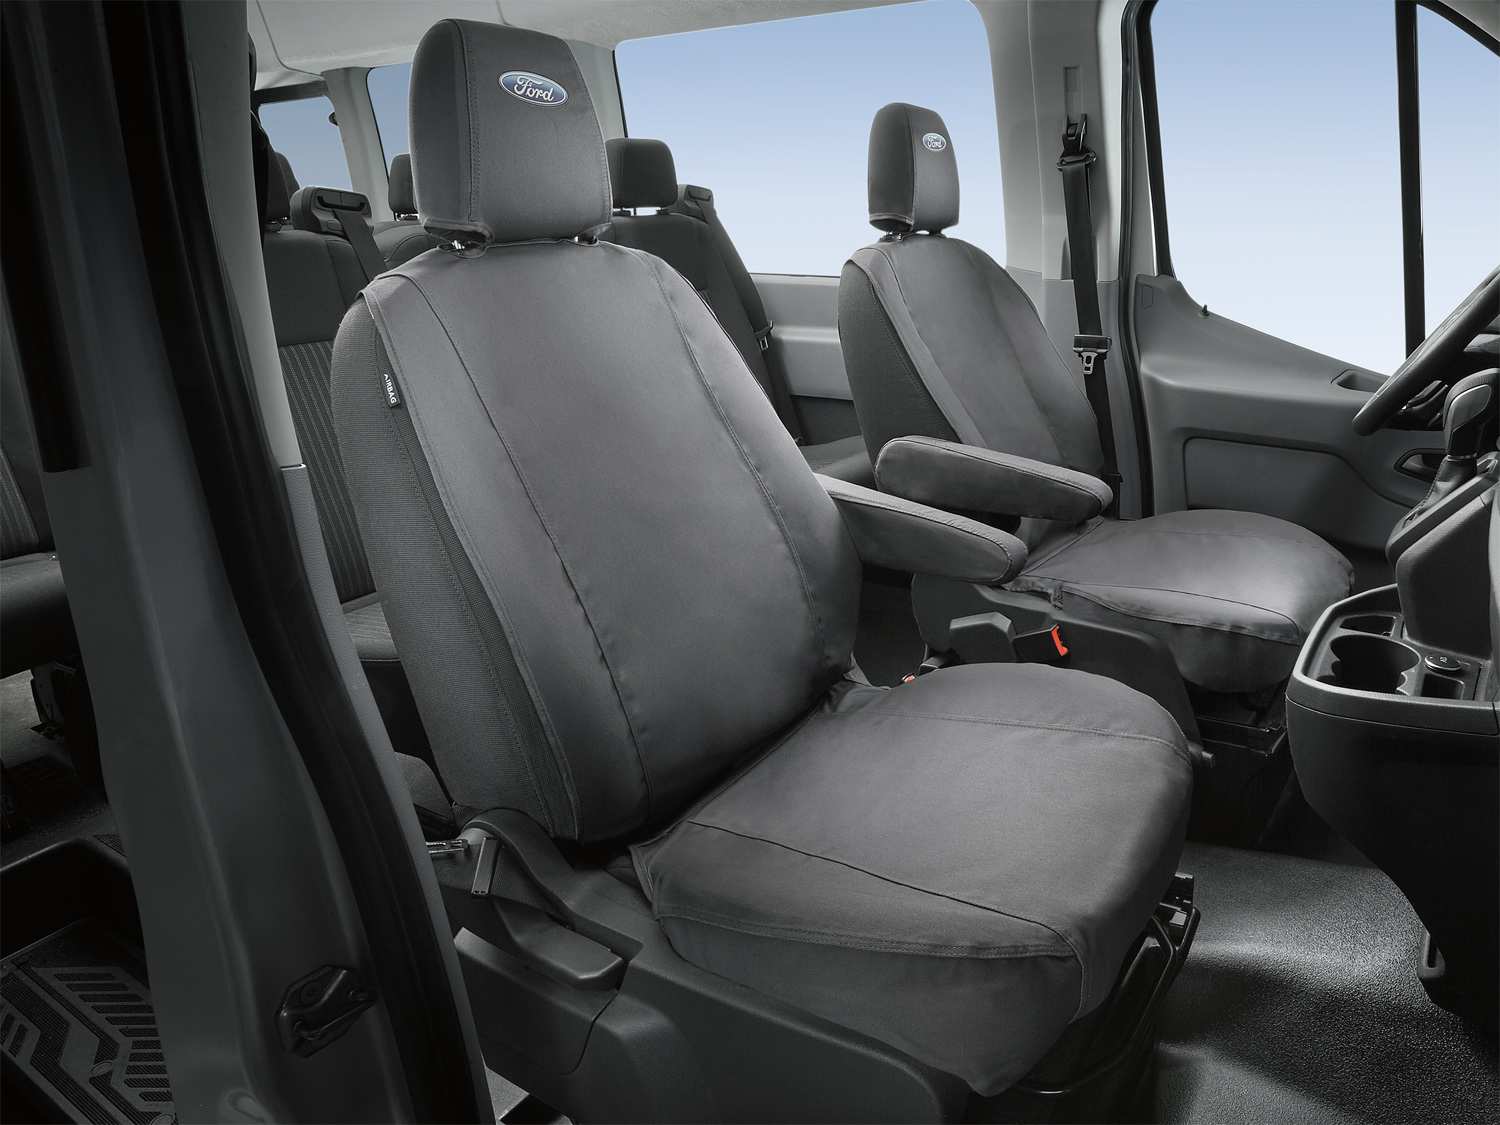 Image for Seat Covers - Protective Seat Covers by Covercraft, Front Row, Captain's Chairs, Gravel from AccessoriesCanada